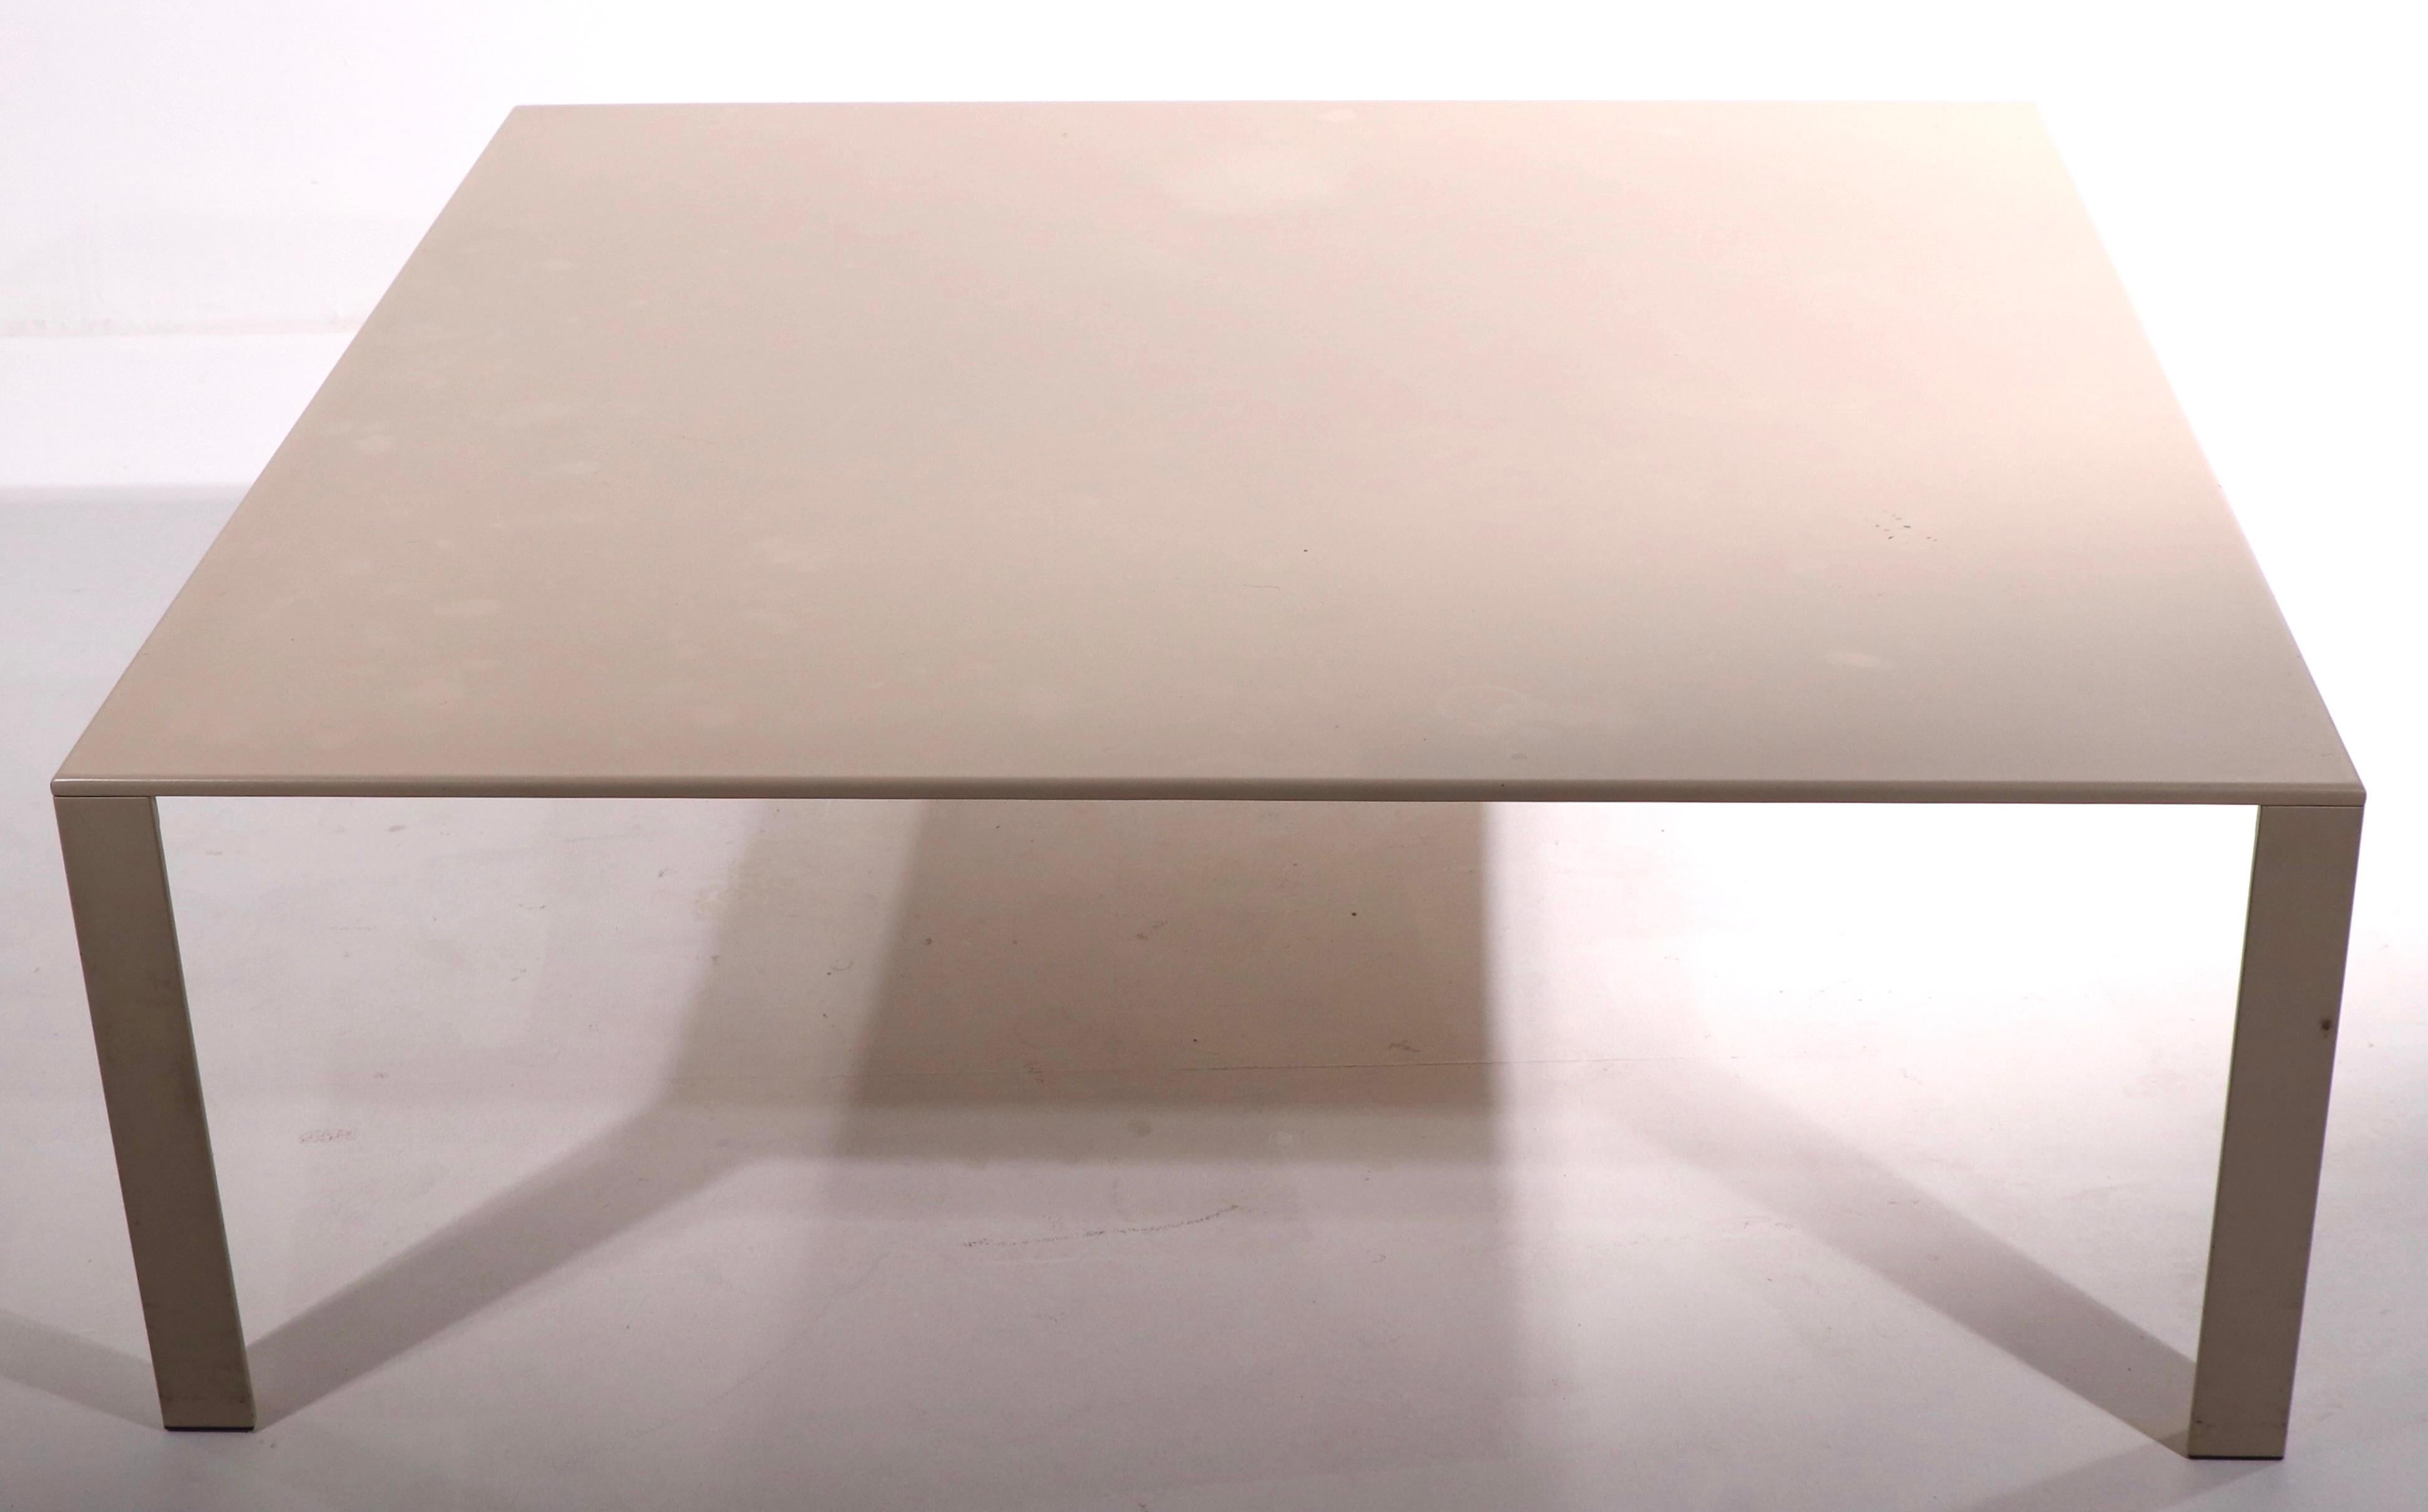 Chic architectural coffee table attributed to Saporiti. This sophisticated table is constructed of painted steel, it is square with angle corner legs. Very heavy and well constructed in the Minimalist, postmodern style, circa 1970/1980's. No